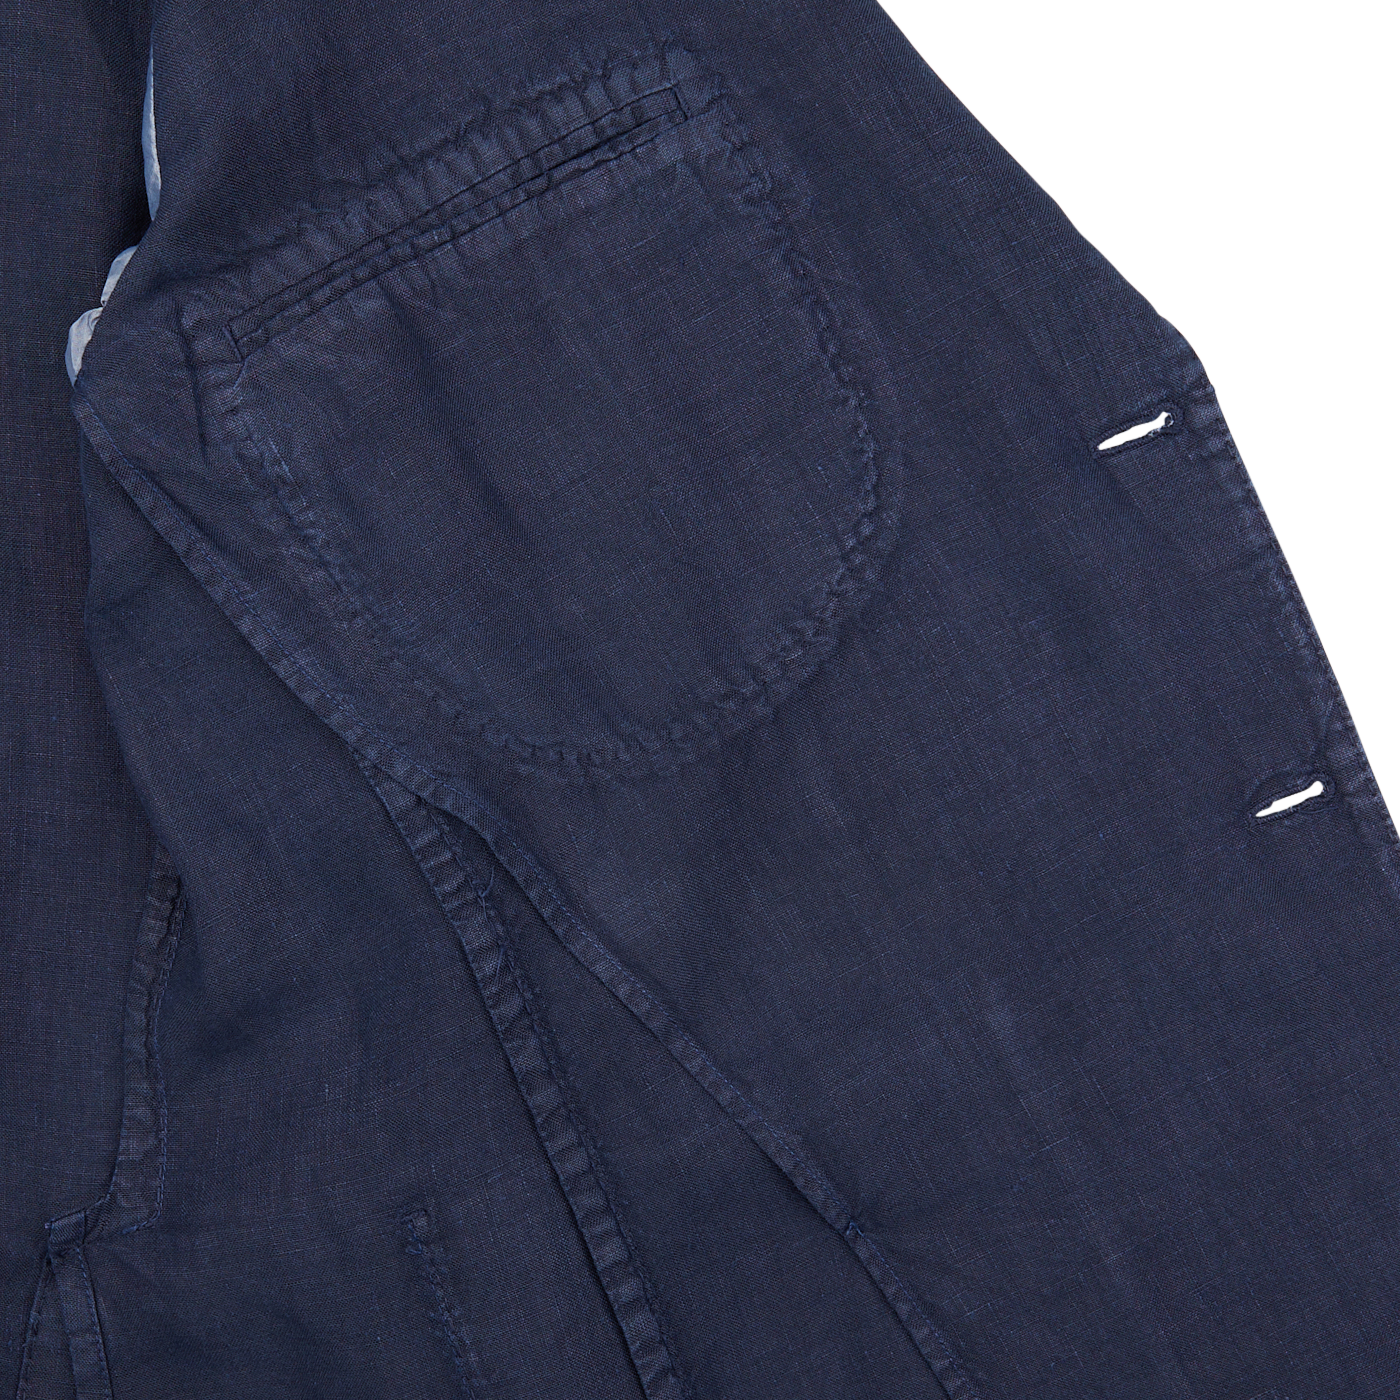 Close-up of a Navy Blue Washed Linen Blazer by L.B.M. 1911 with a pocket detail and button closures.